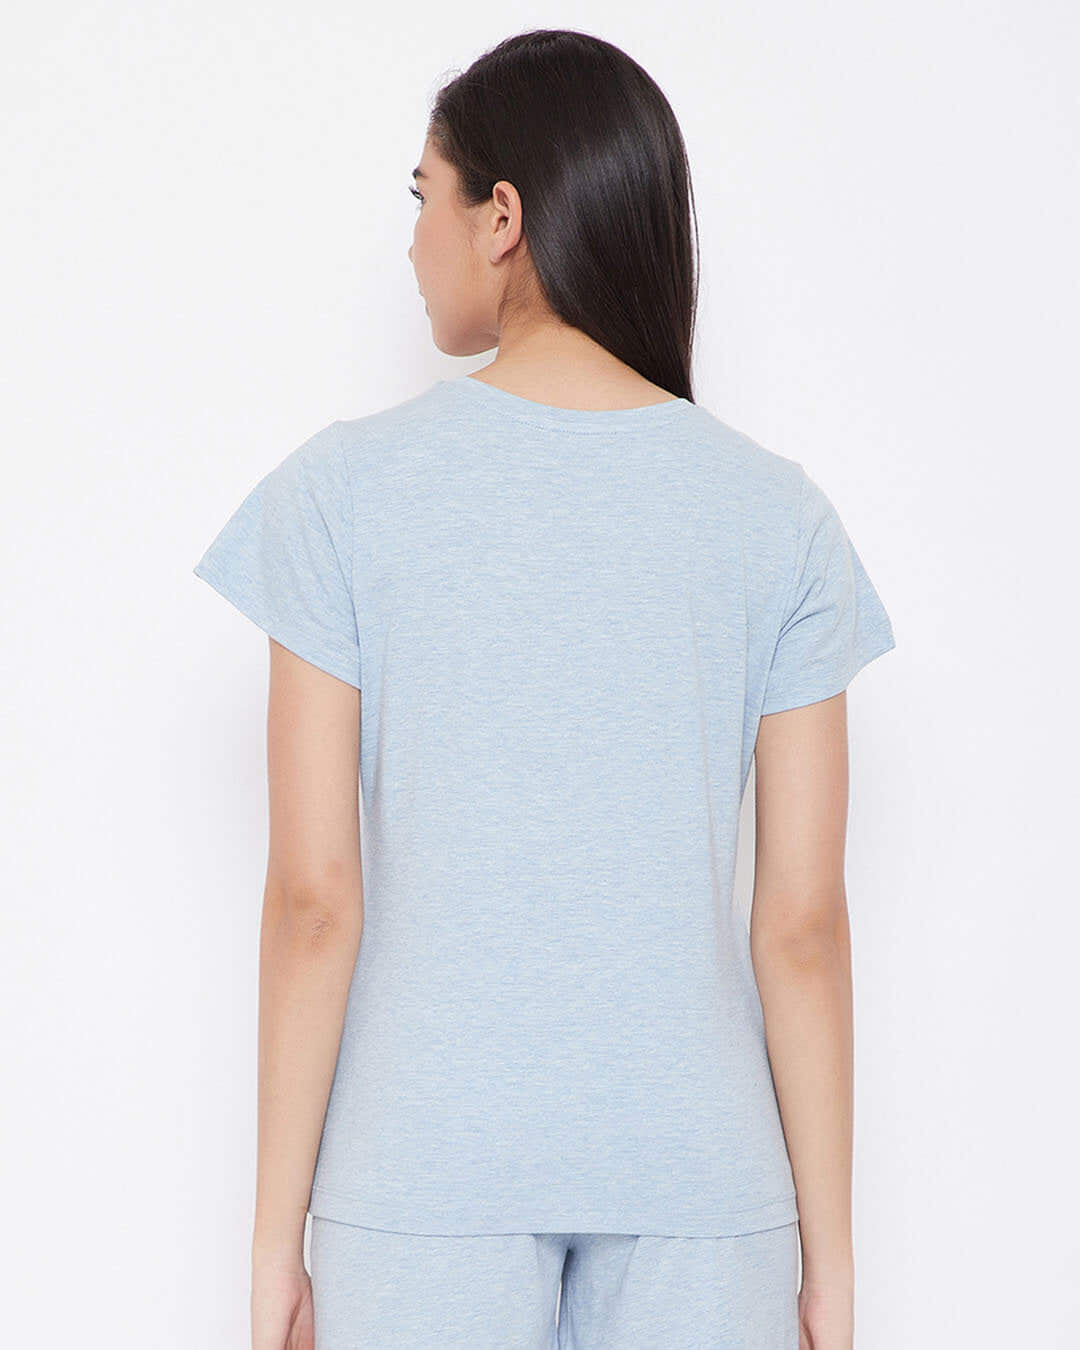 Shop Chic Basic Top In Charcoal Grey   Cotton Rich-Back